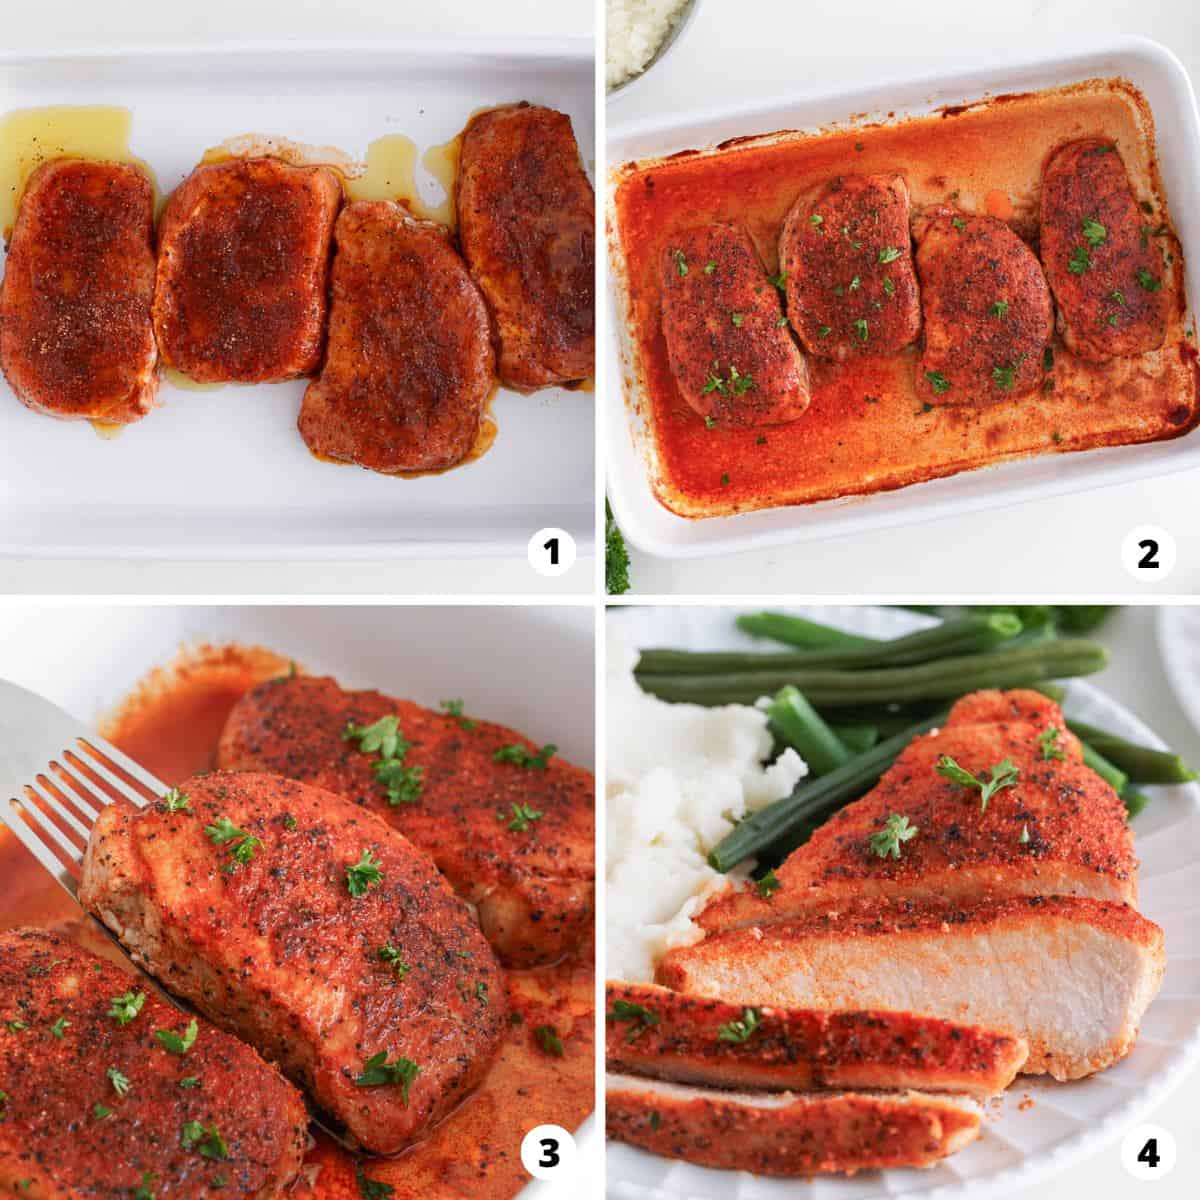 Showing how to make baked pork chops in a 4 step collage.